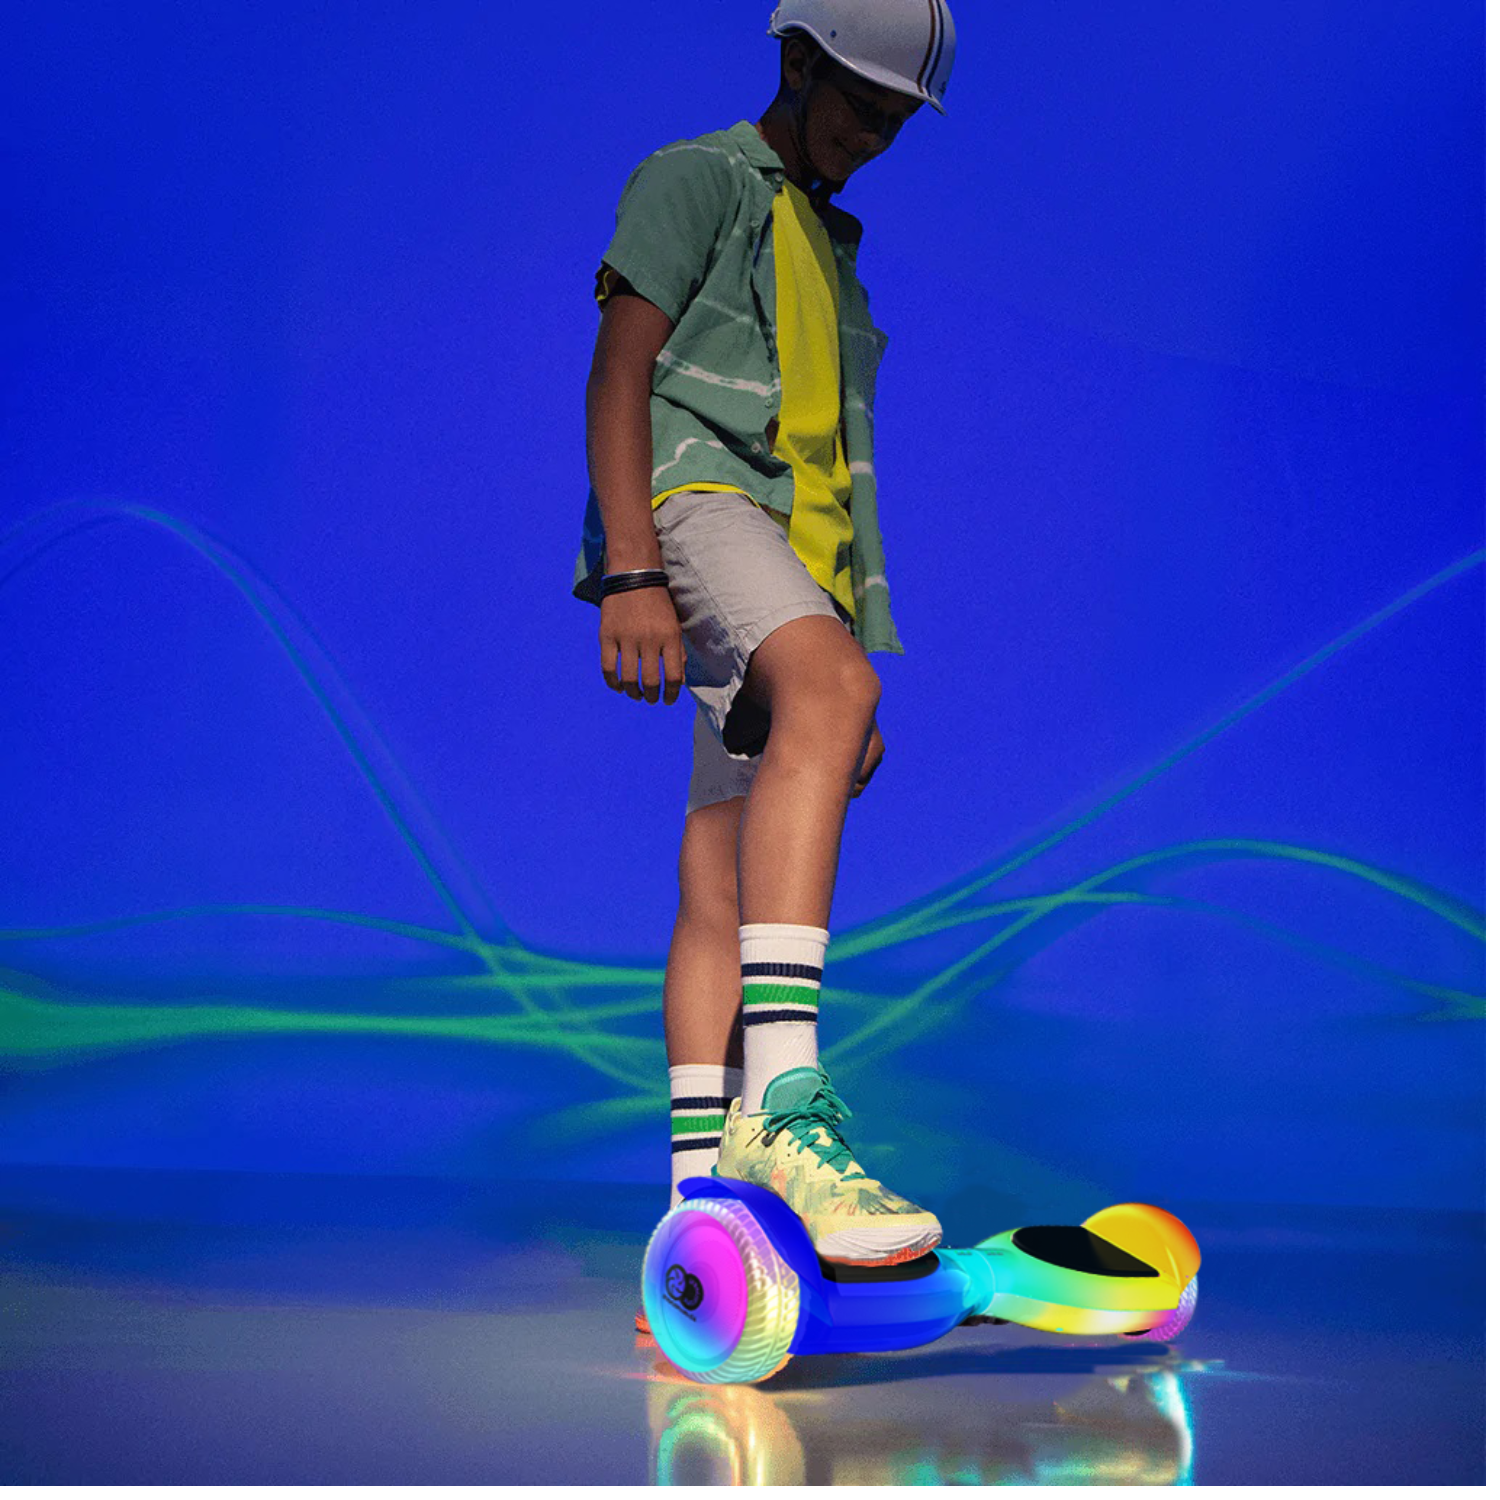 Refurbished (Good) Gyrocopters LED Luminous Hoverboard for kids - UL 2272, Bluetooth, LED wheels, Free Bag with No Fall Technology